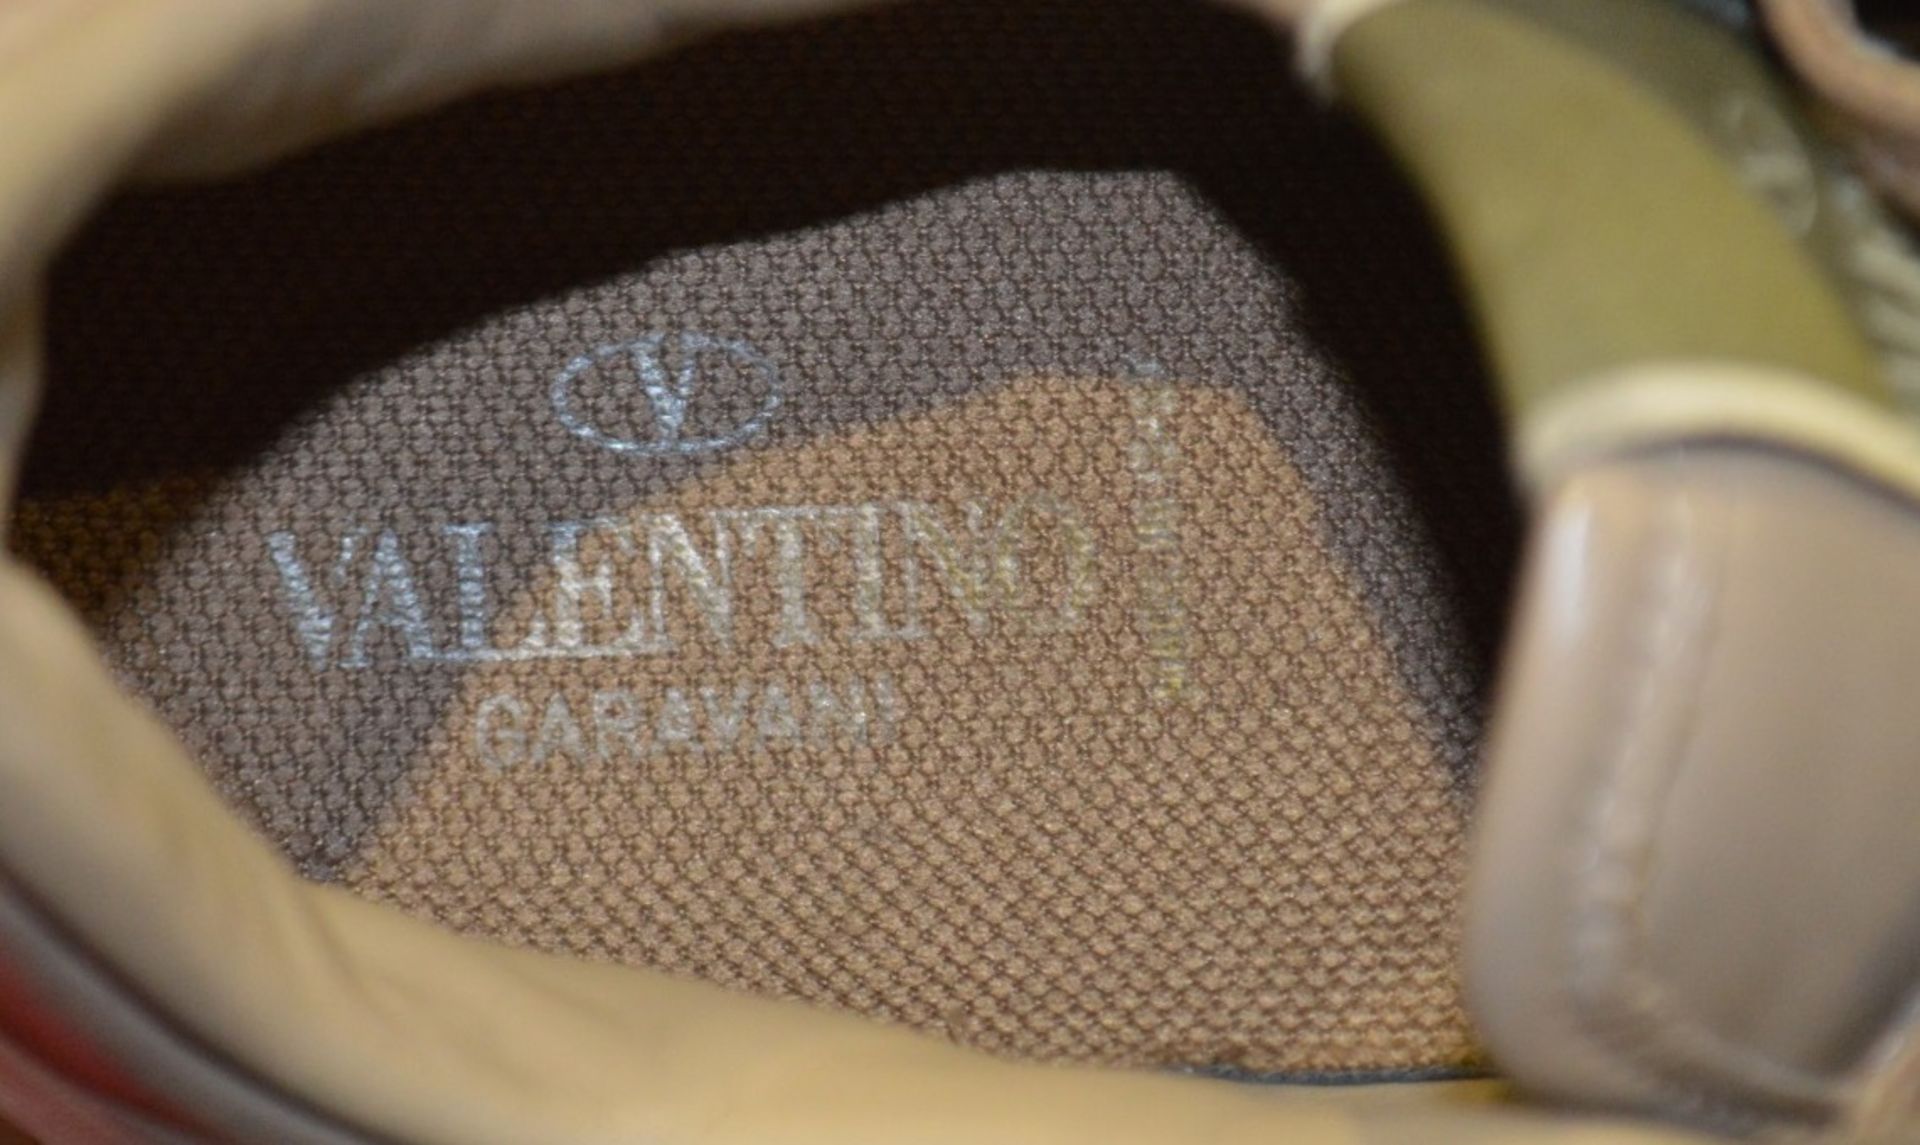 1 x Pair Of Men's Genuine Valentino Trainers In Beige - Size: 42 - Preowned In Very Good Condition - - Image 3 of 7